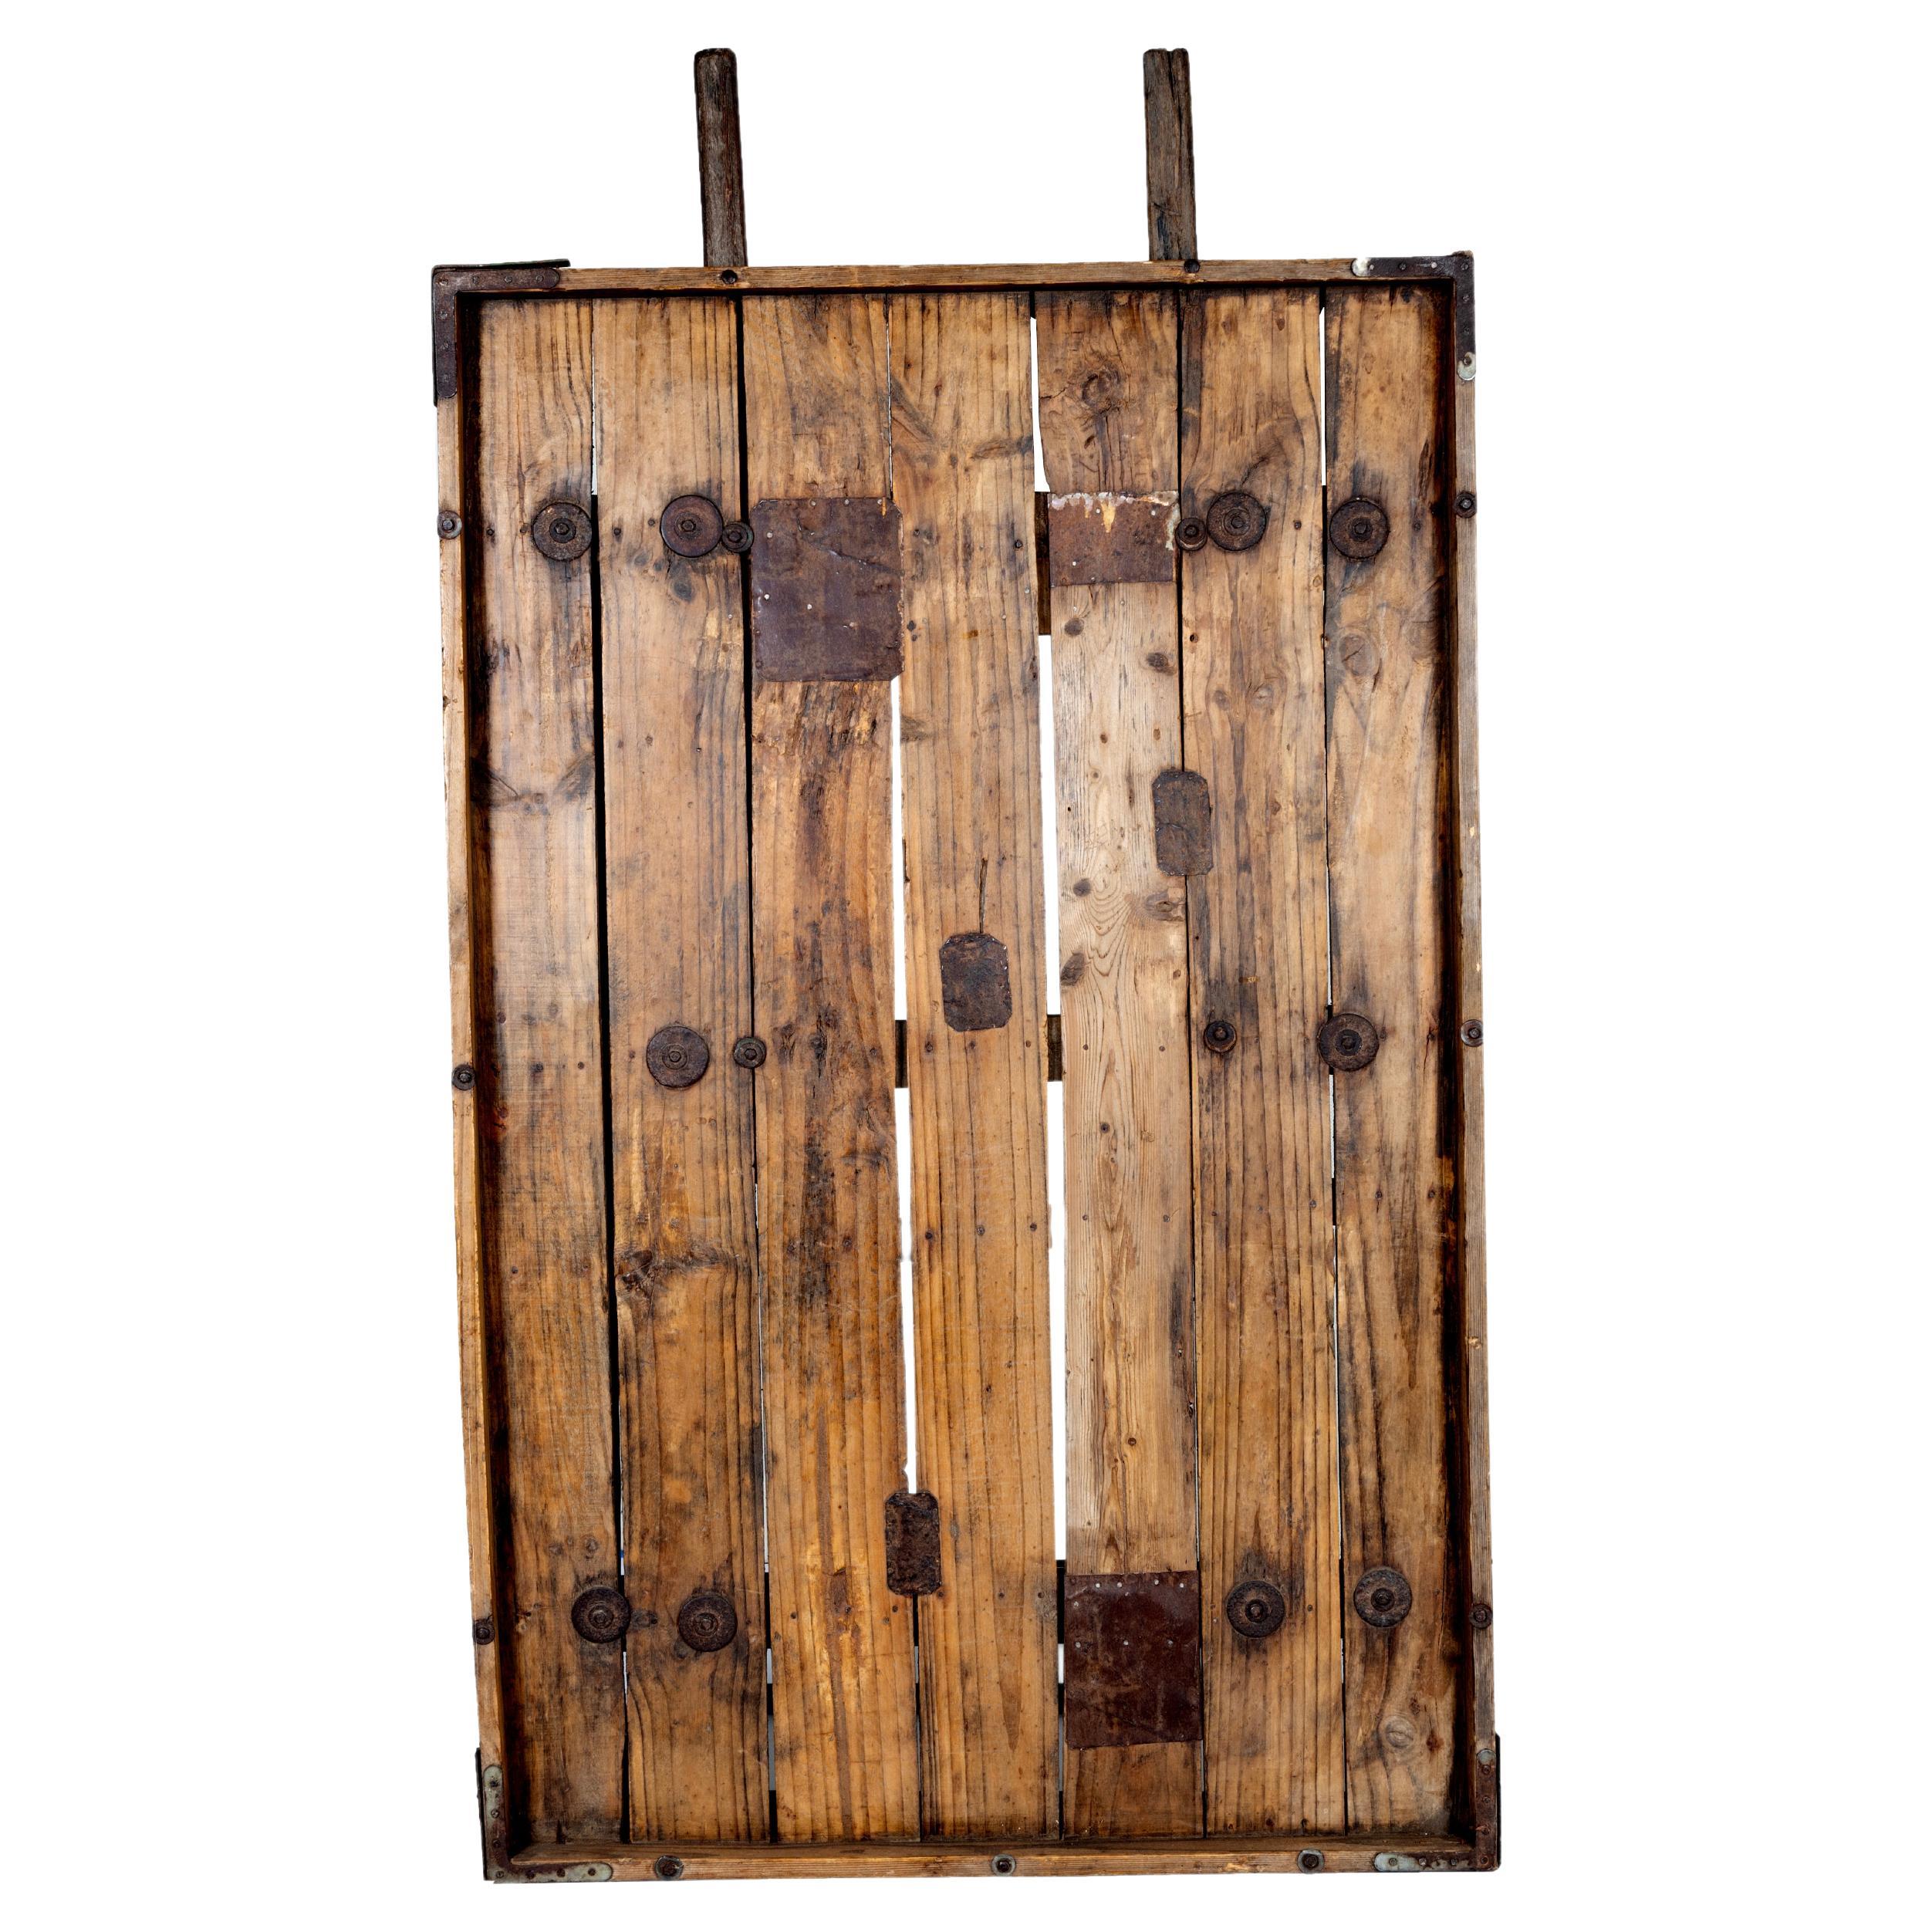 Rustic Wood Panel with Handles